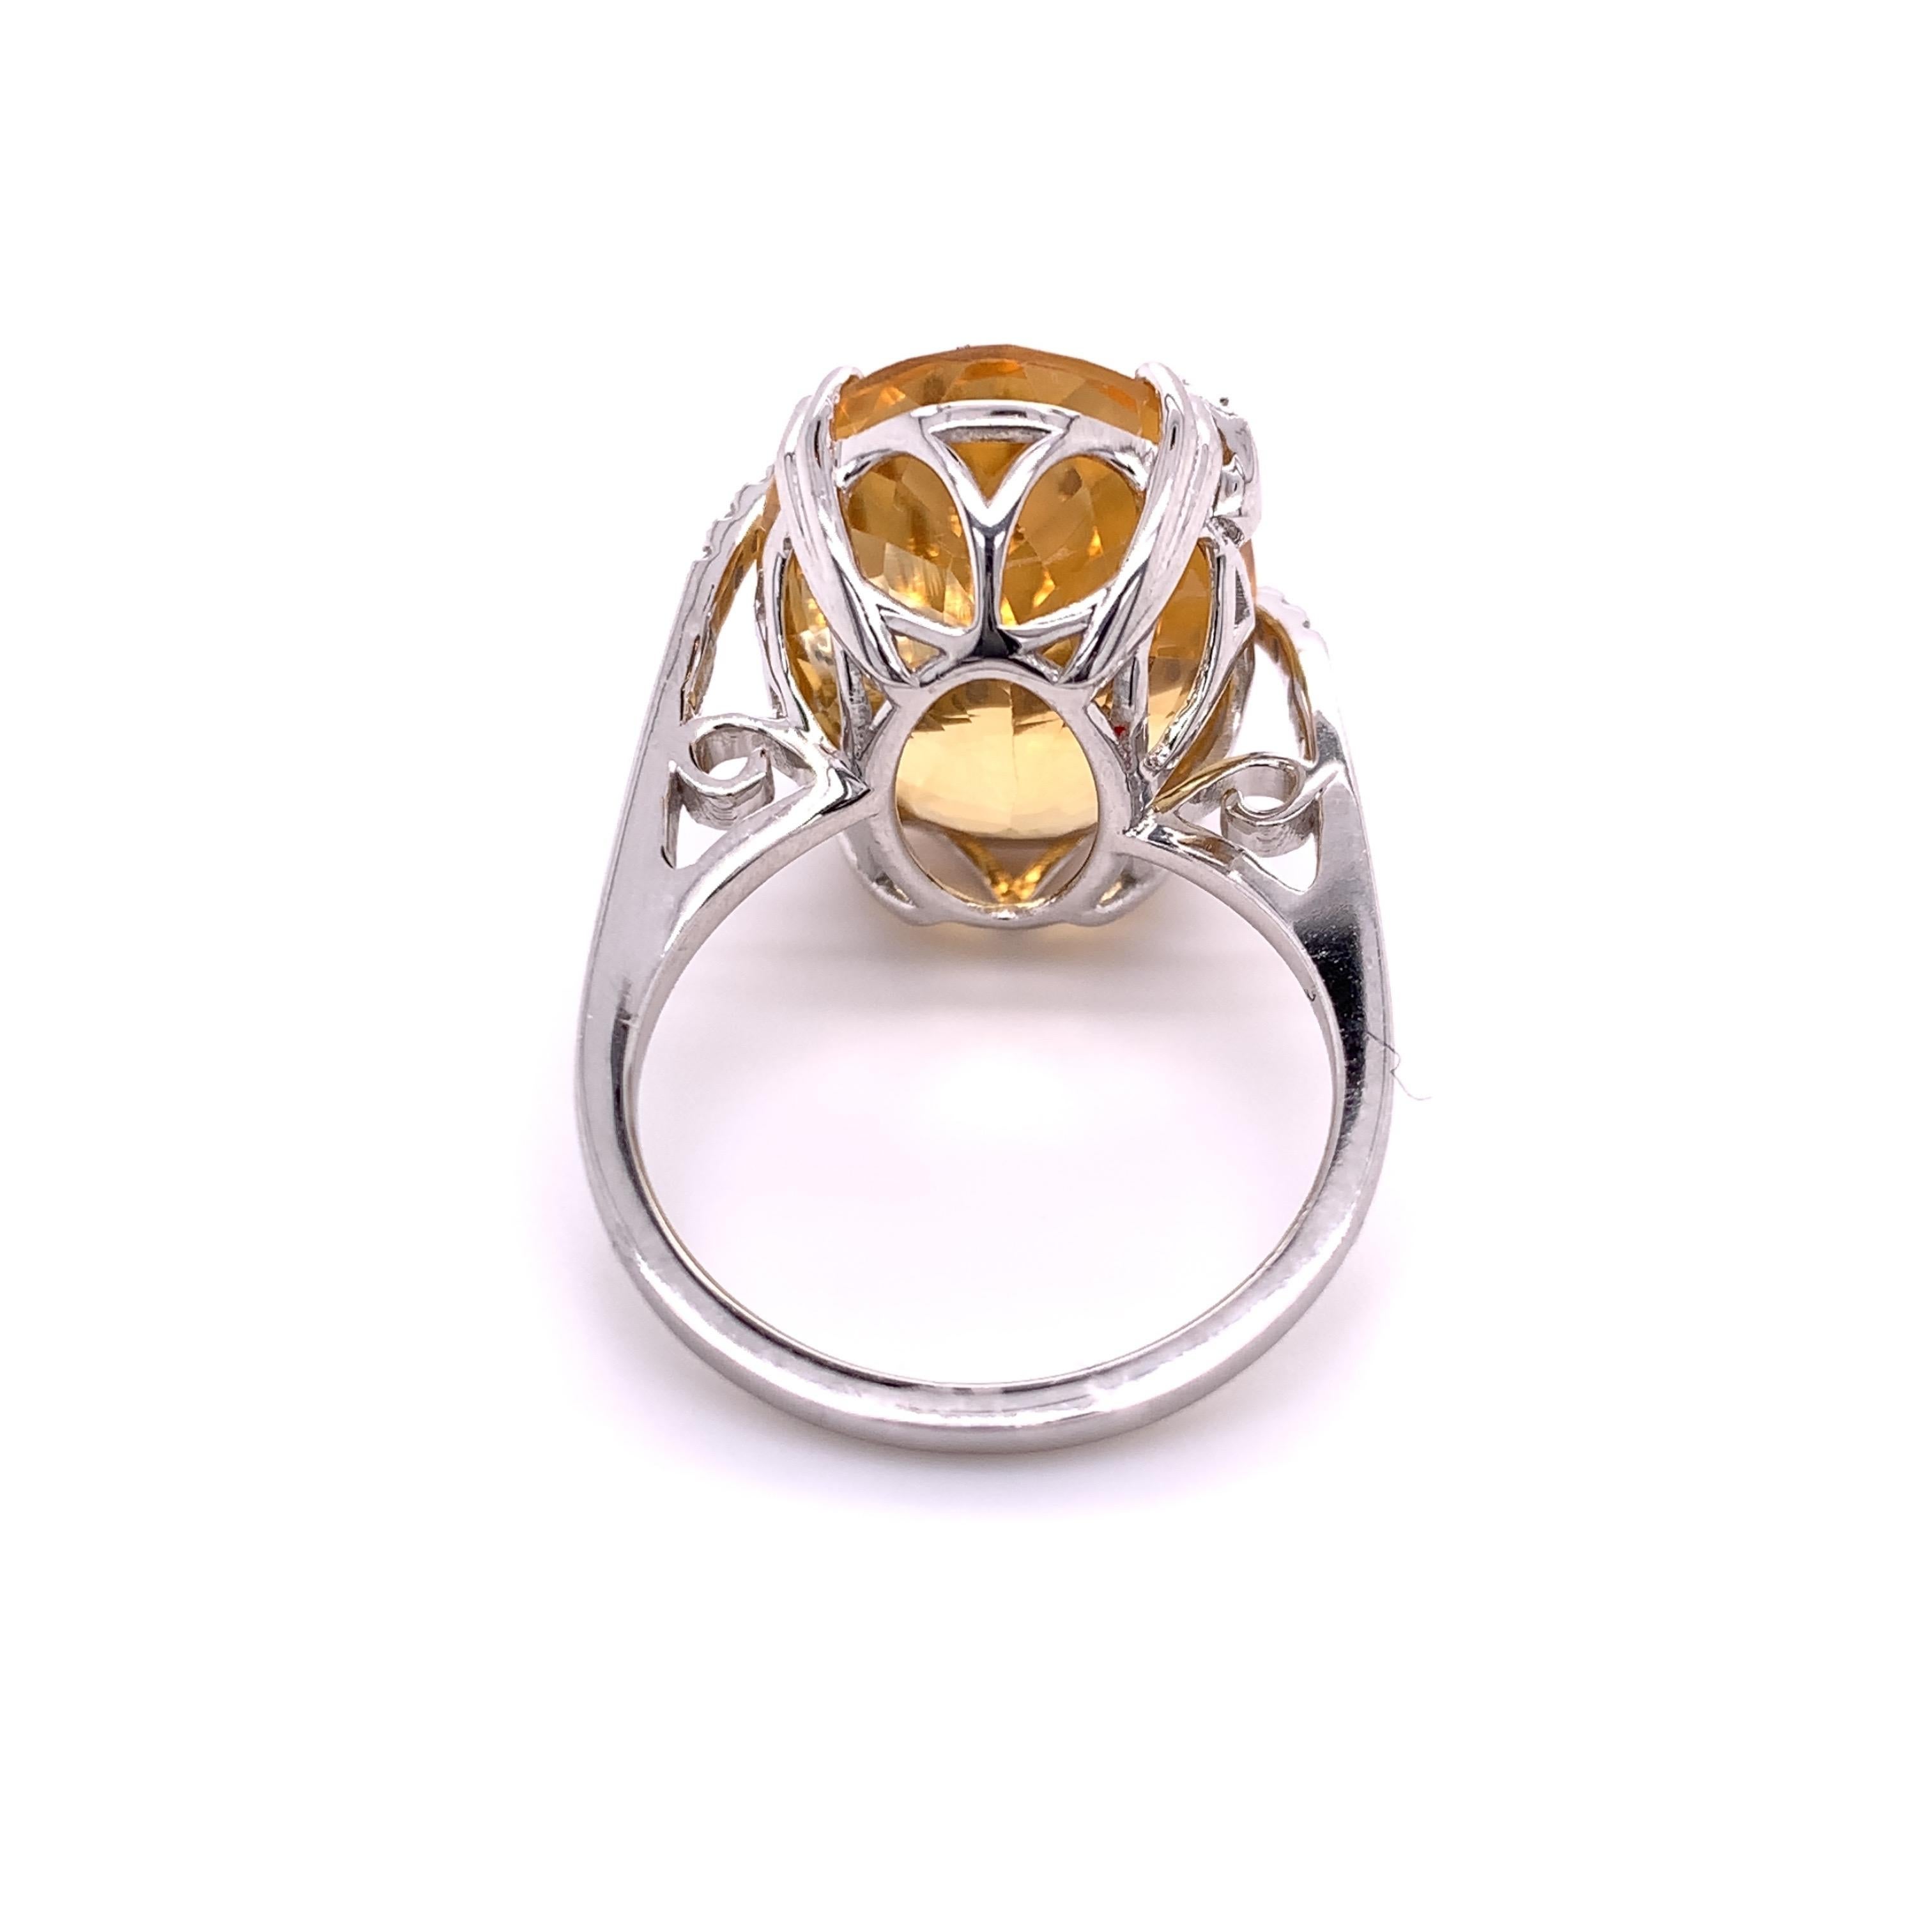 Contemporary 13.11 Carat Citrine Cocktail Ring